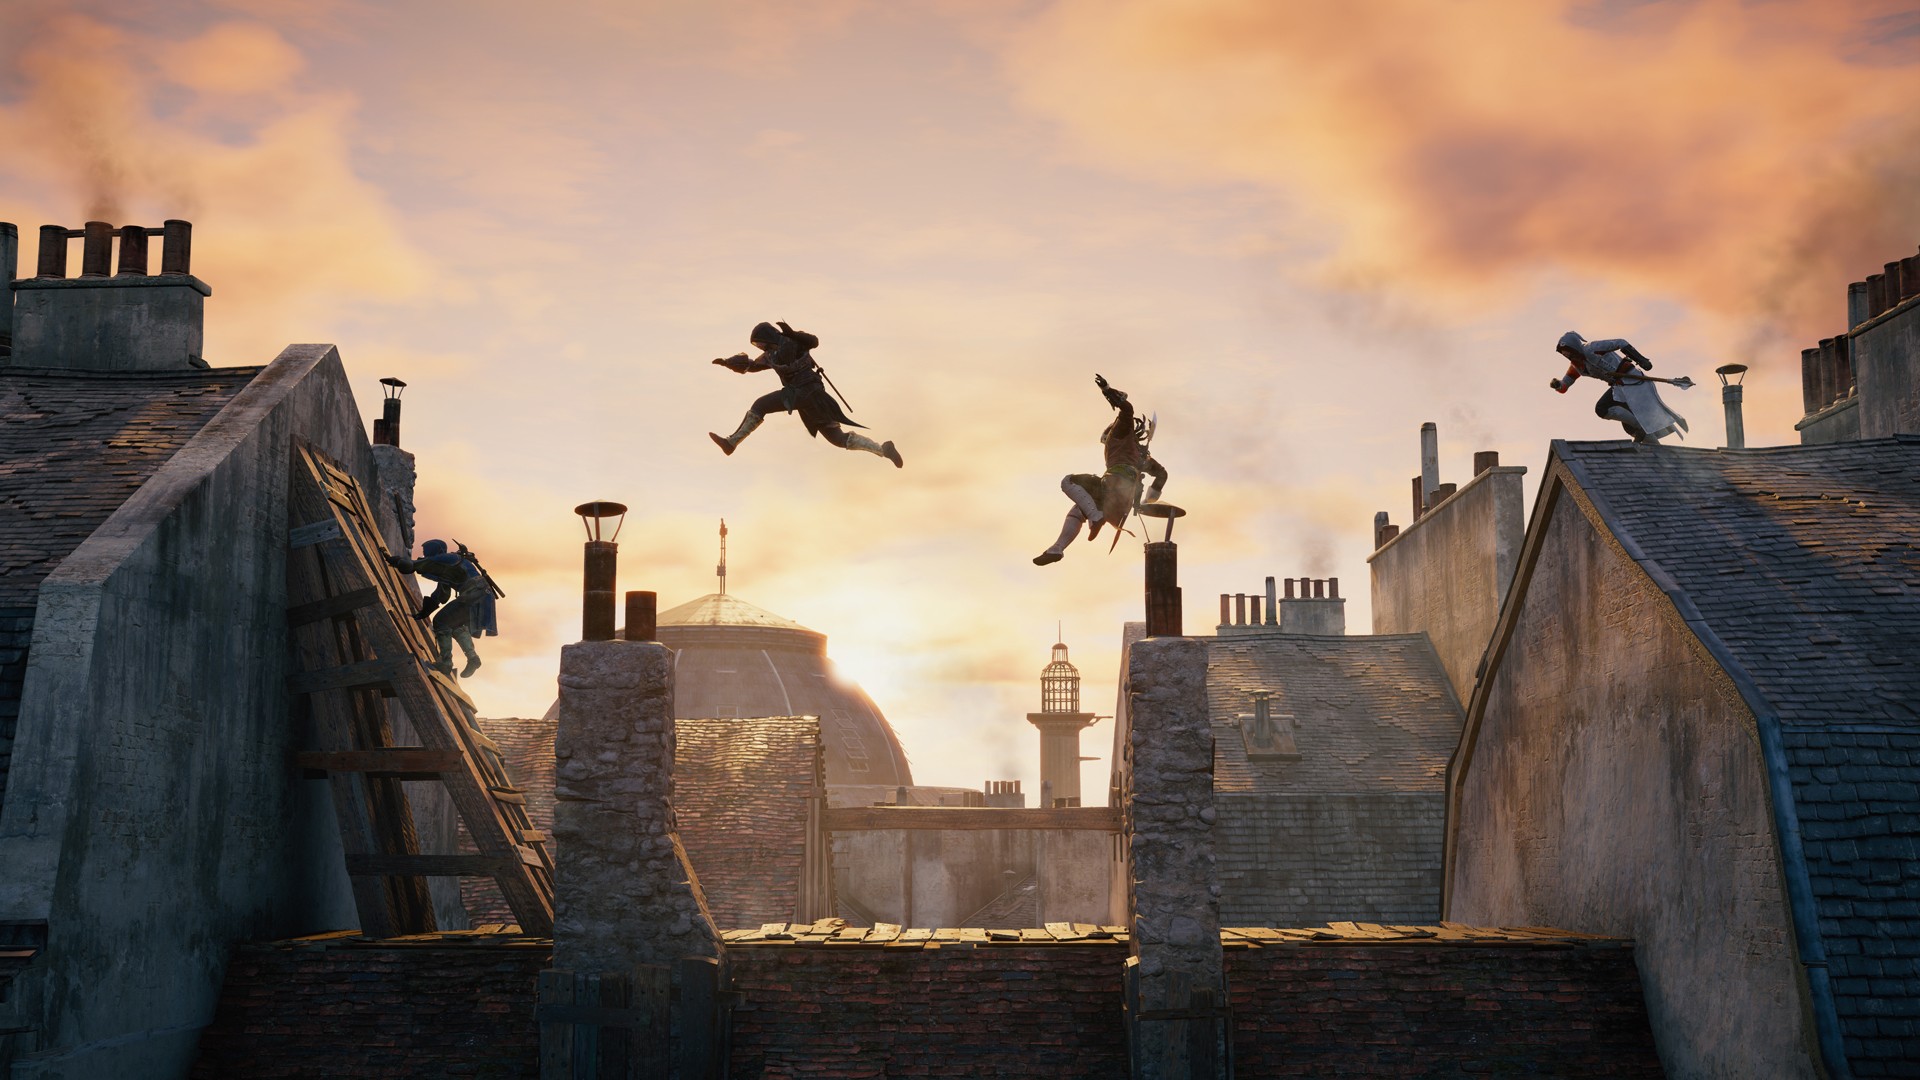 Assassins Creed Video Games Rooftops Parkour Sequence Photography 1920x1080